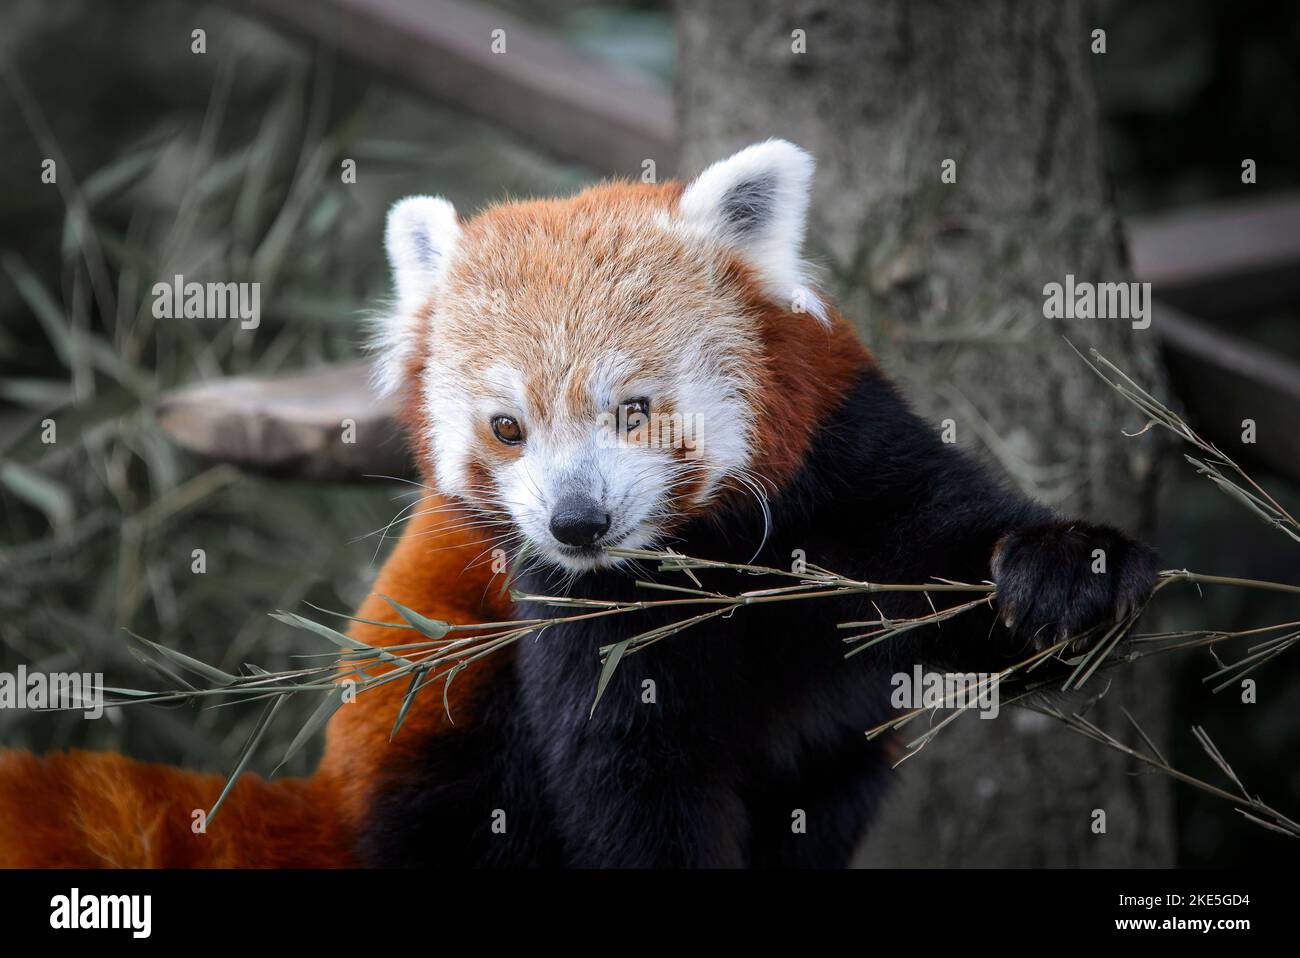 A red panda in captivity at a zoo in England. in captivity at a zoo in England. Stock Photo